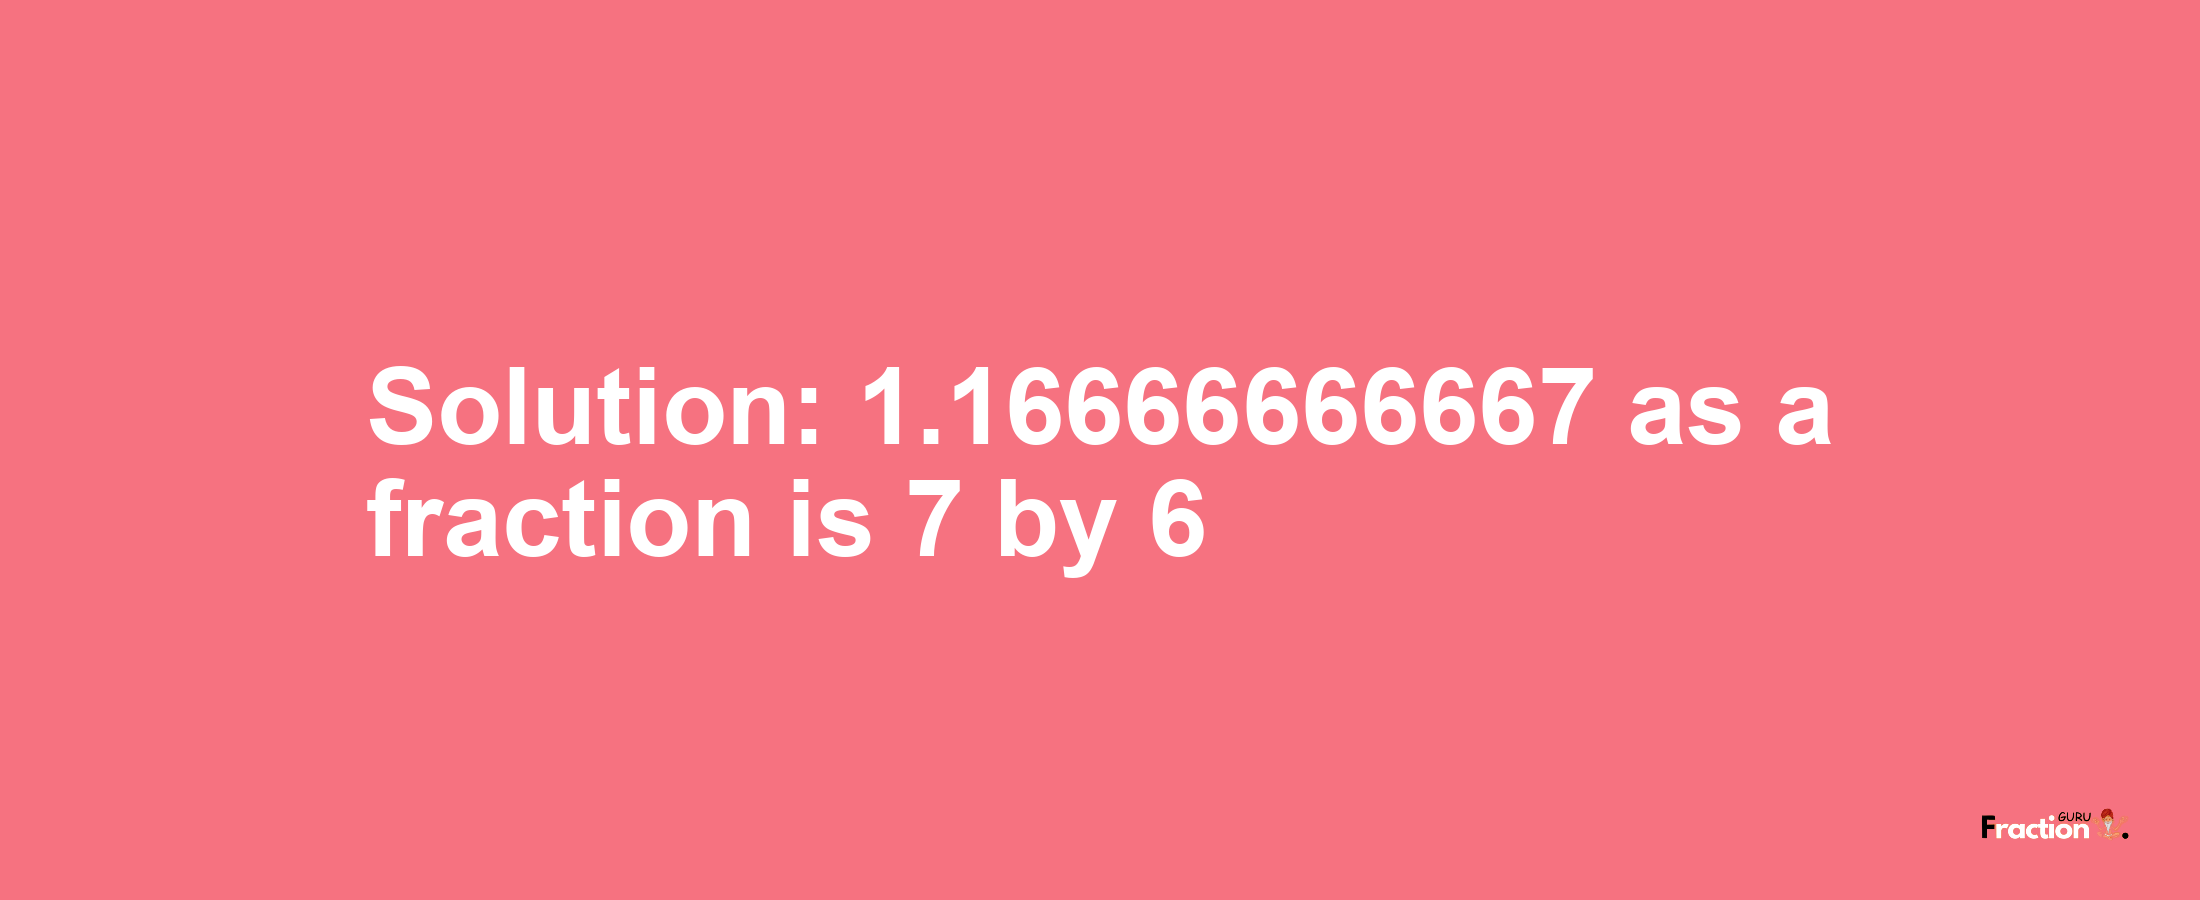 Solution:1.16666666667 as a fraction is 7/6